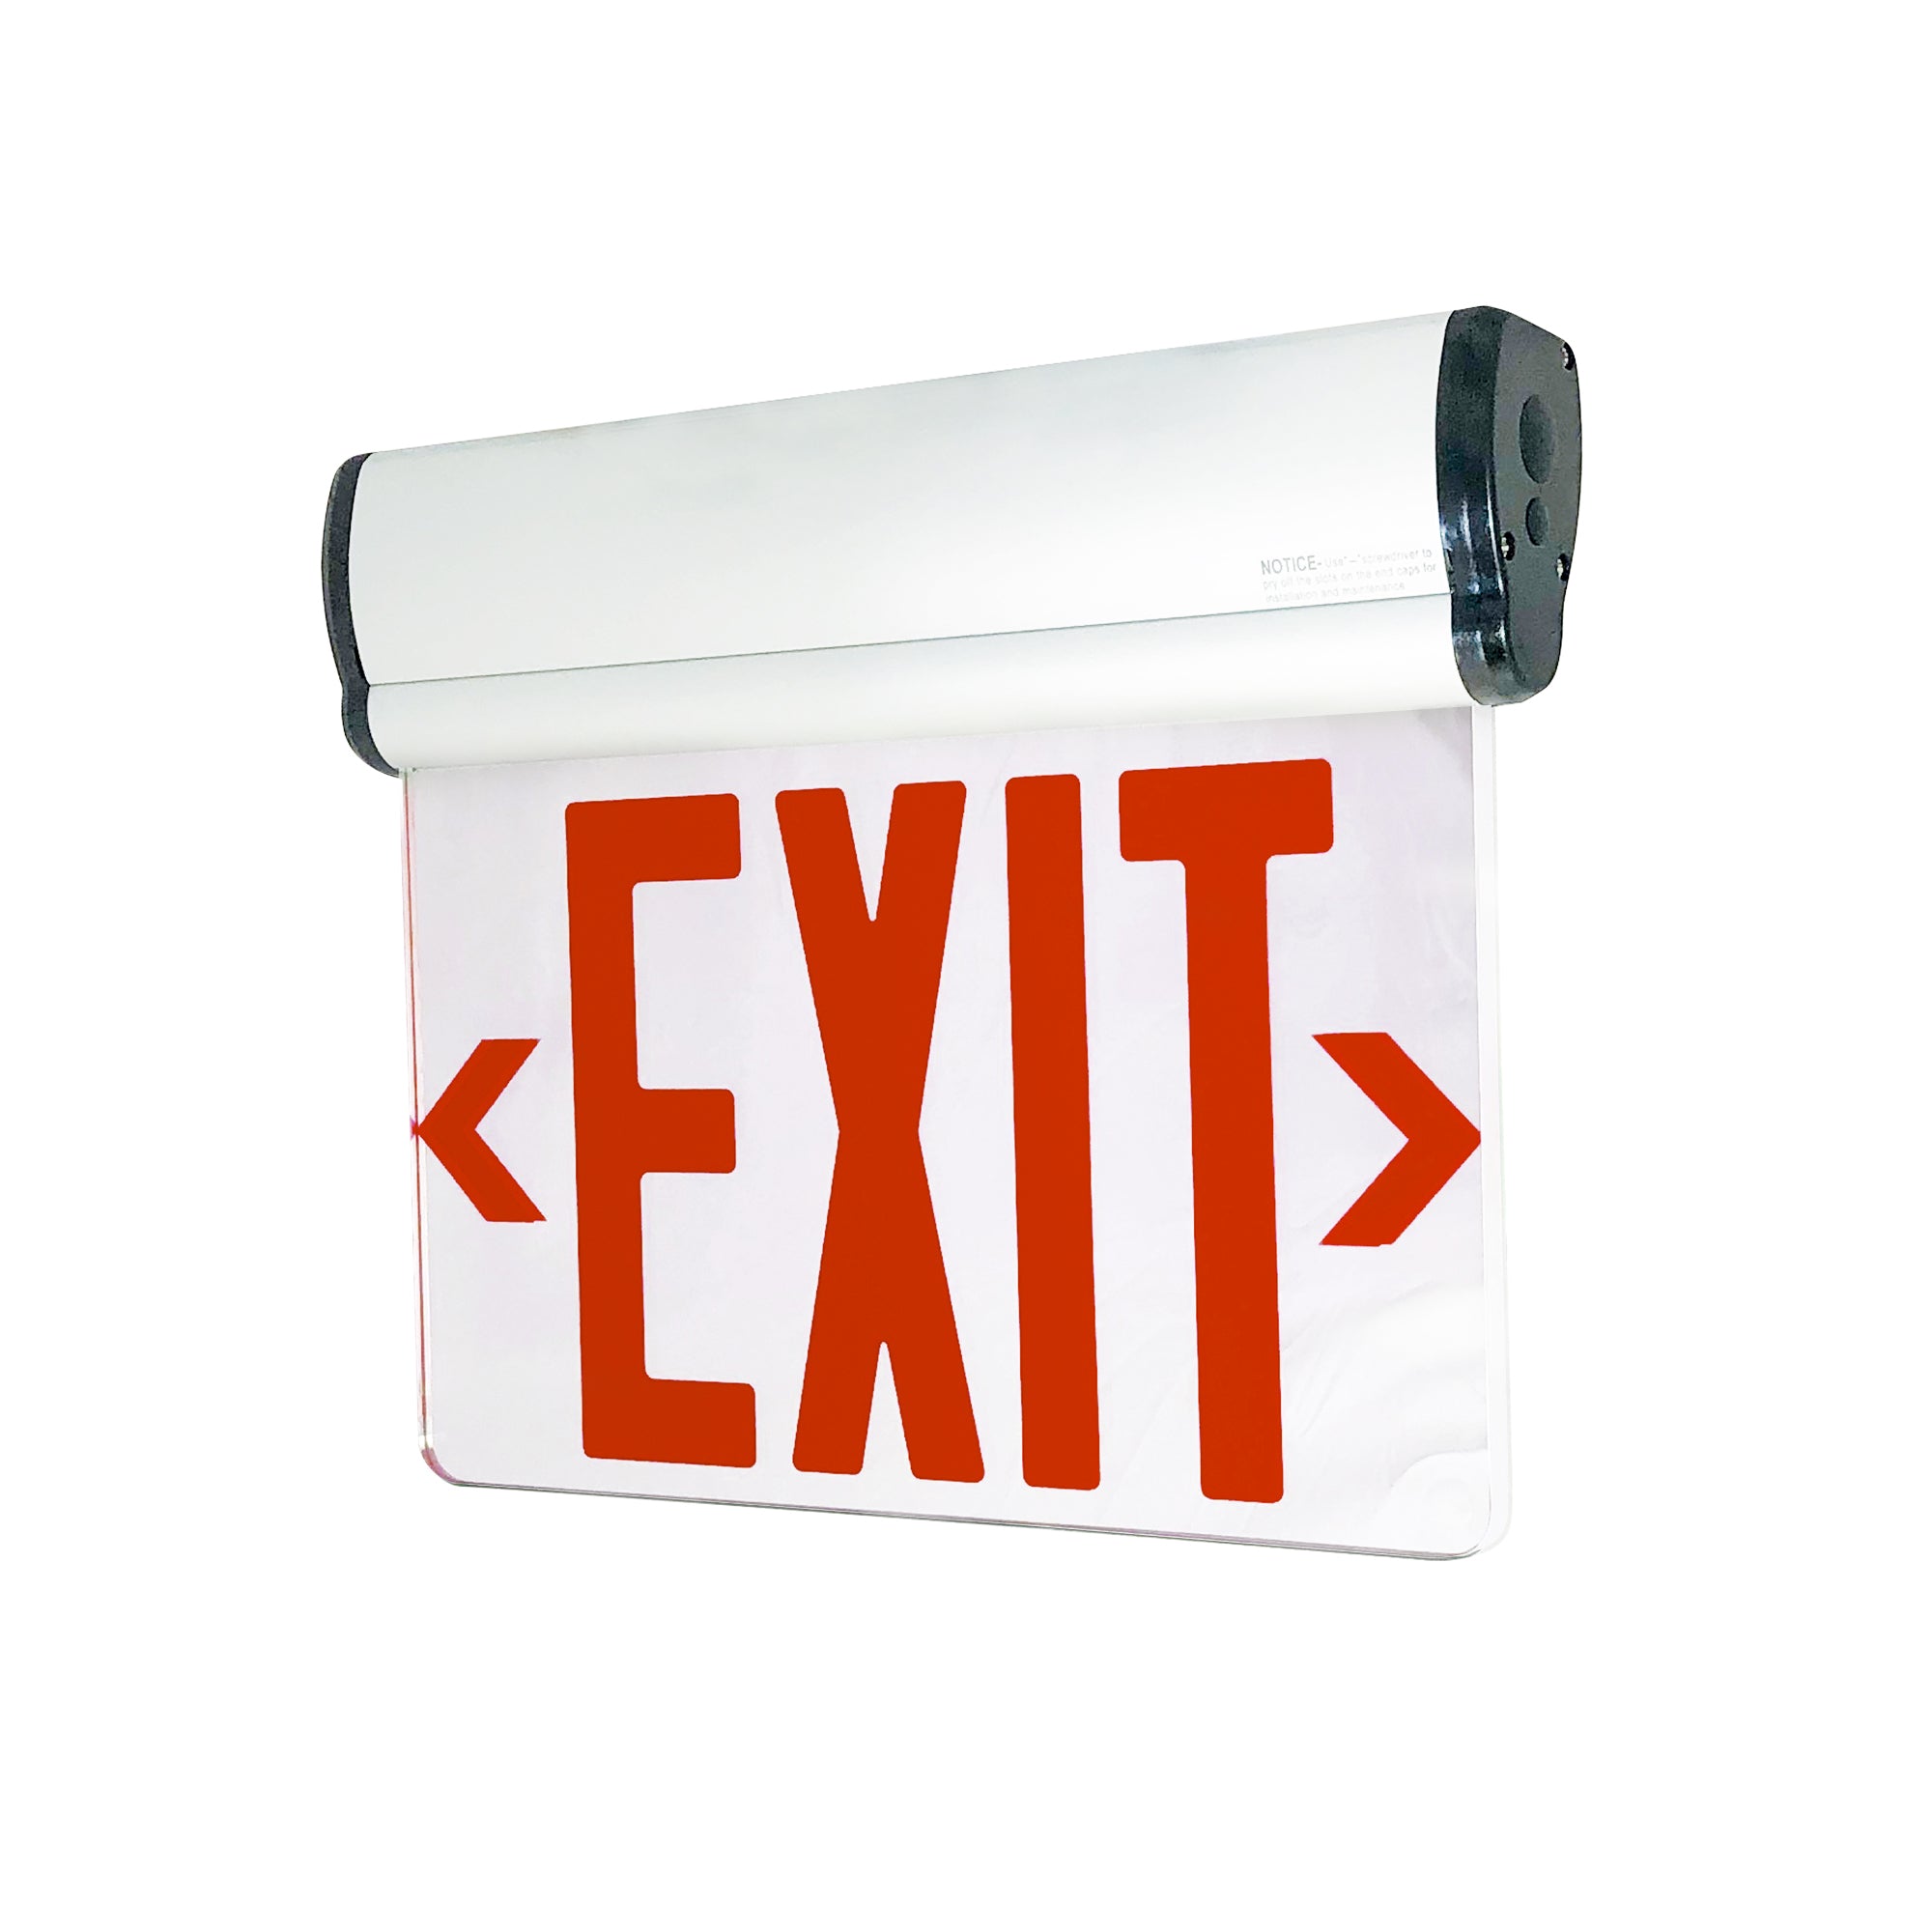 Nora Lighting NX-812-LEDRMW - Exit / Emergency - Surface Adjustable LED Edge-Lit Exit Sign, Battery Backup, 6 Inch Red Letters, Single Face / Mirrored Acrylic, White Housing